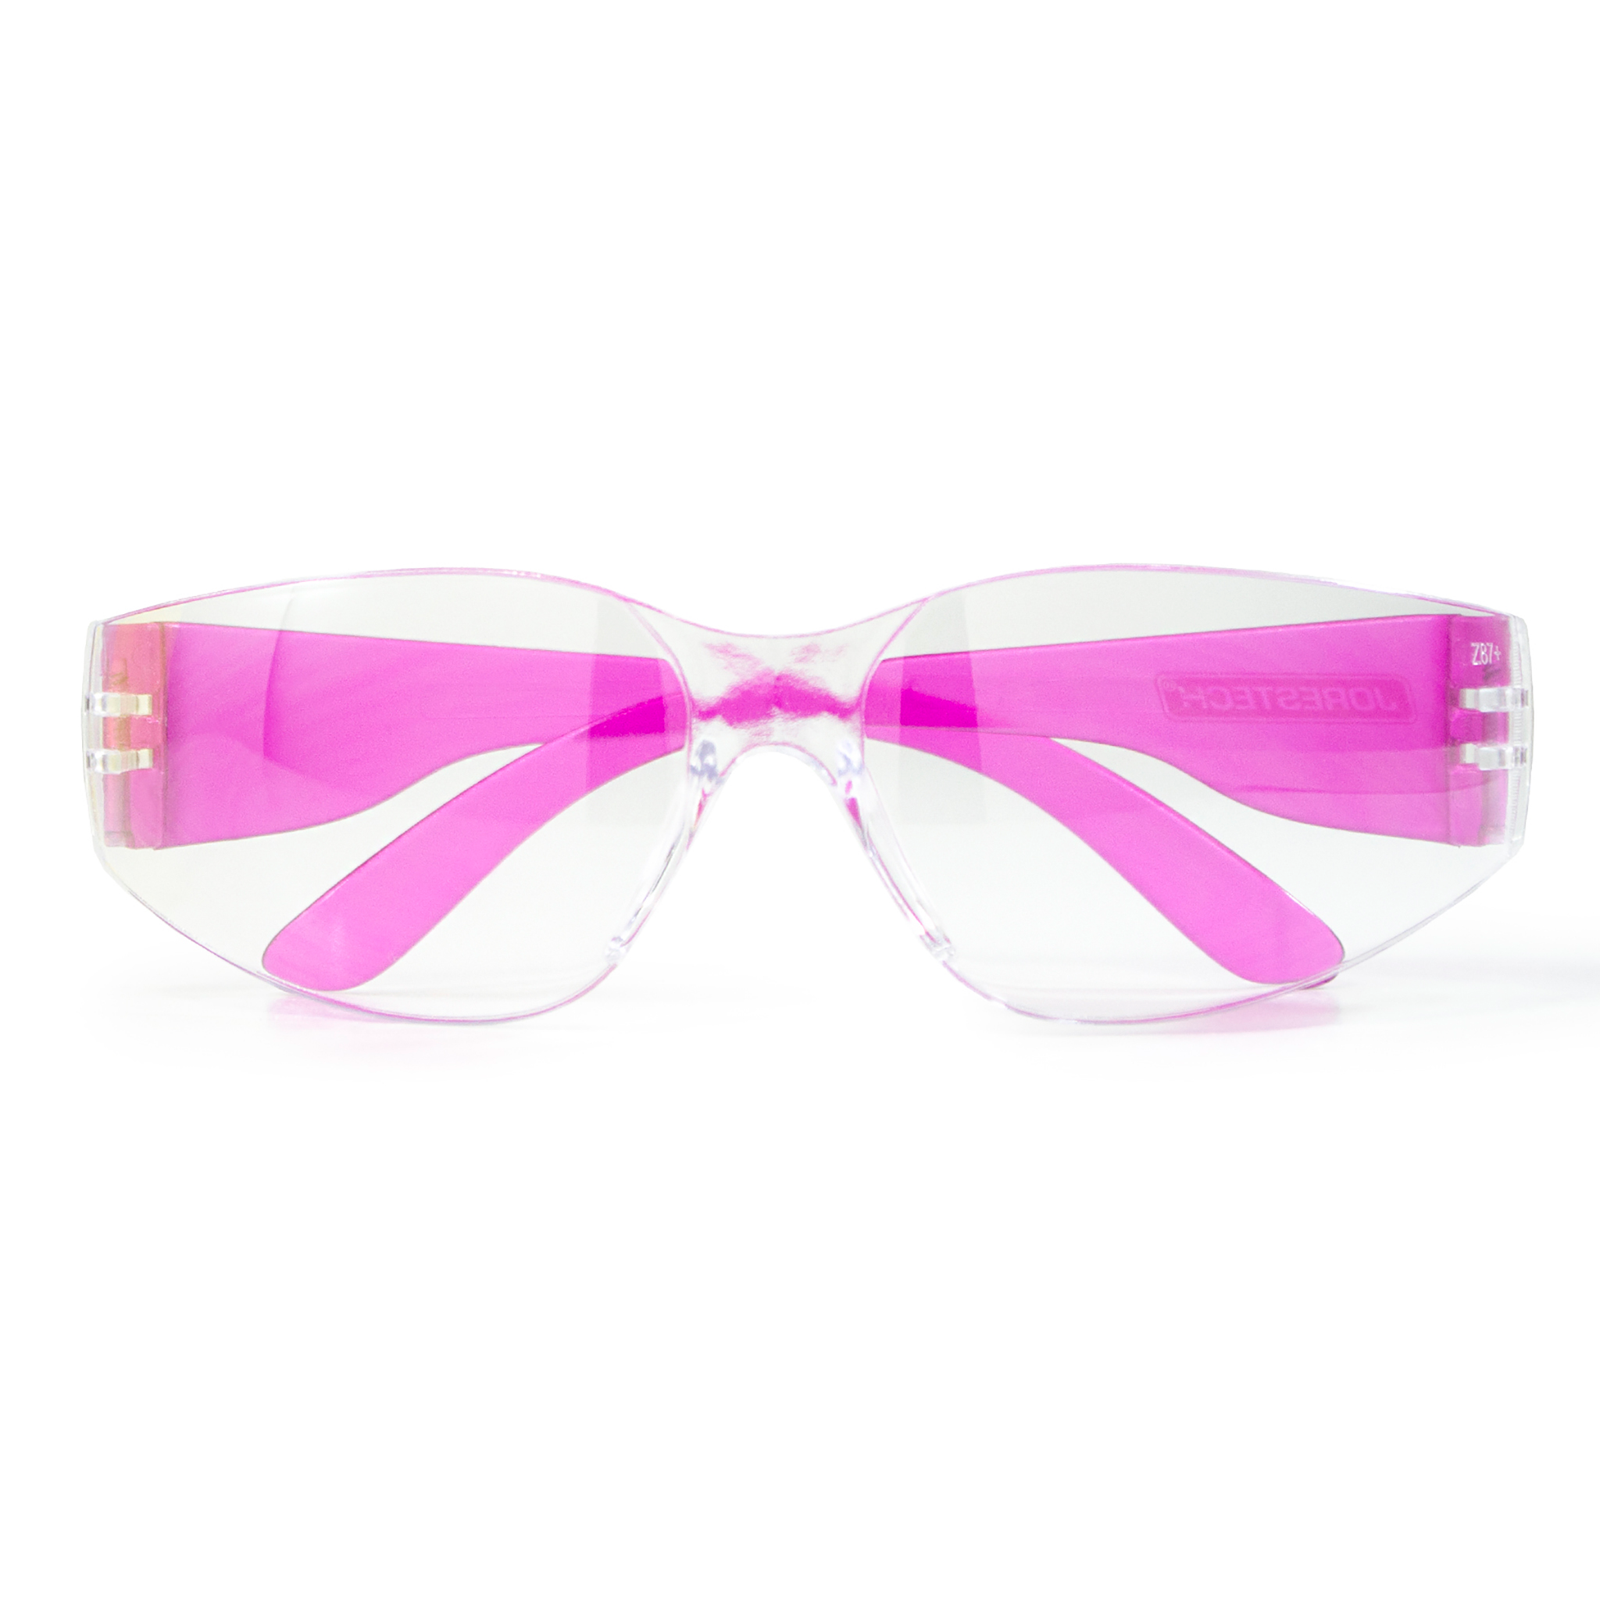 Clear polycarbonate safety glasses for high impact protection with colored pink temples